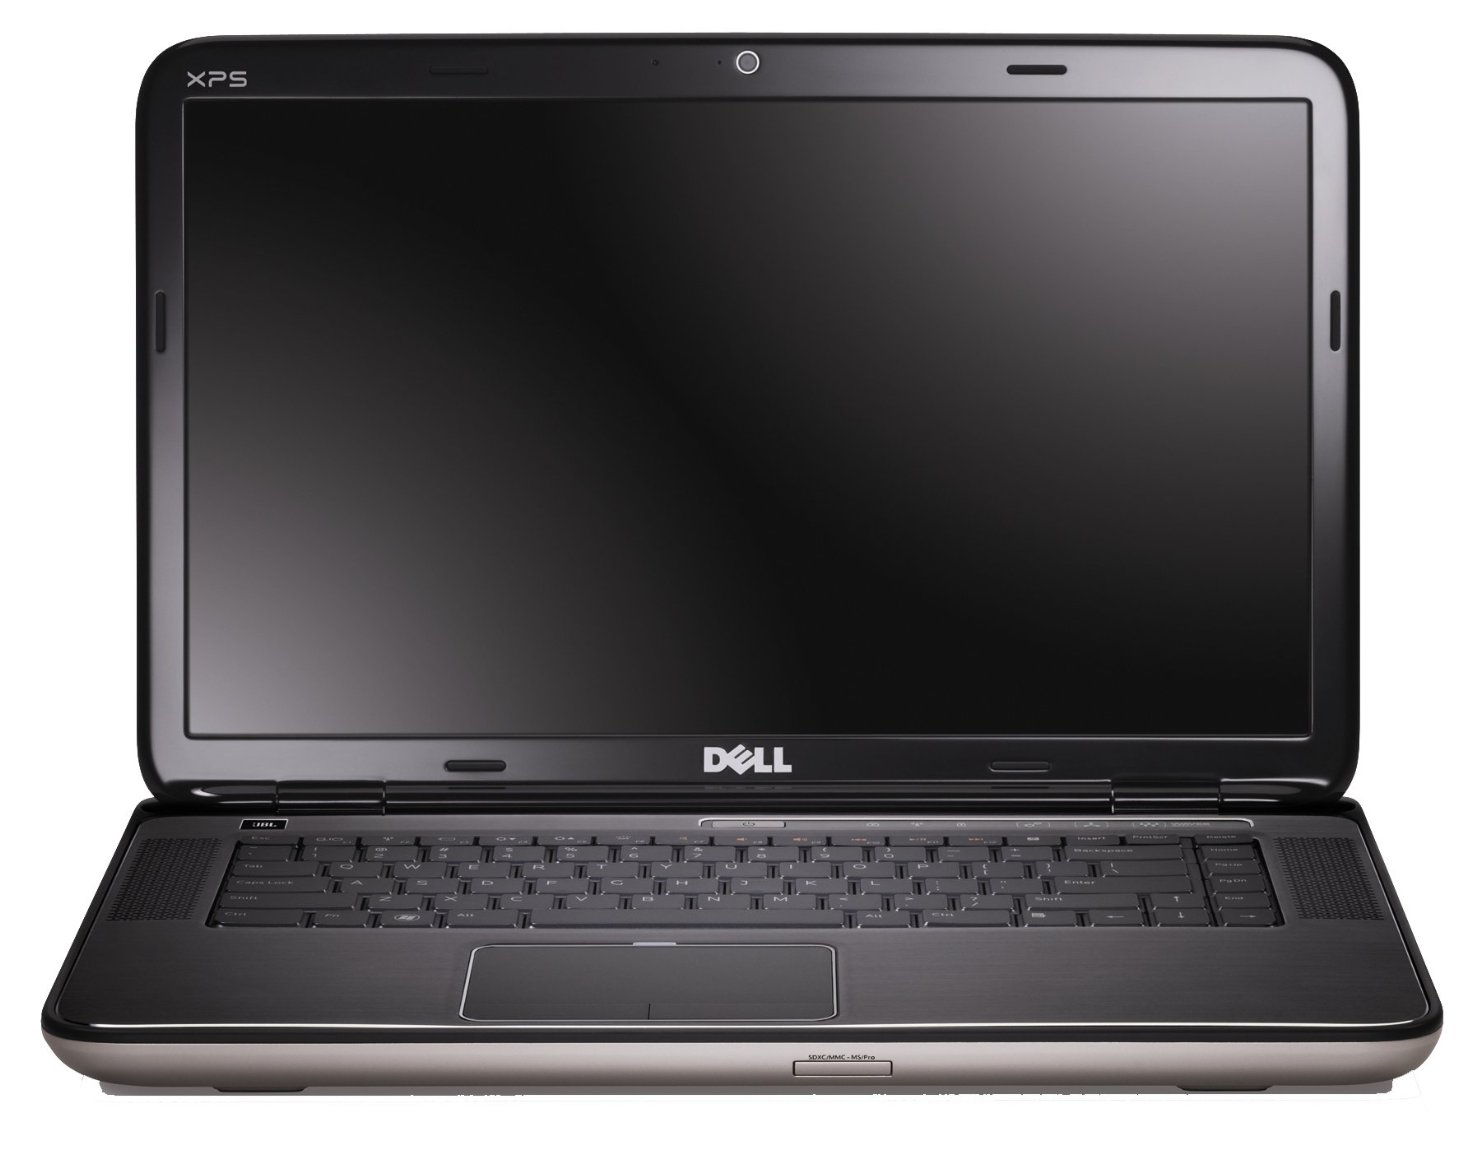  Dell XPS 15 9570-6658  #1